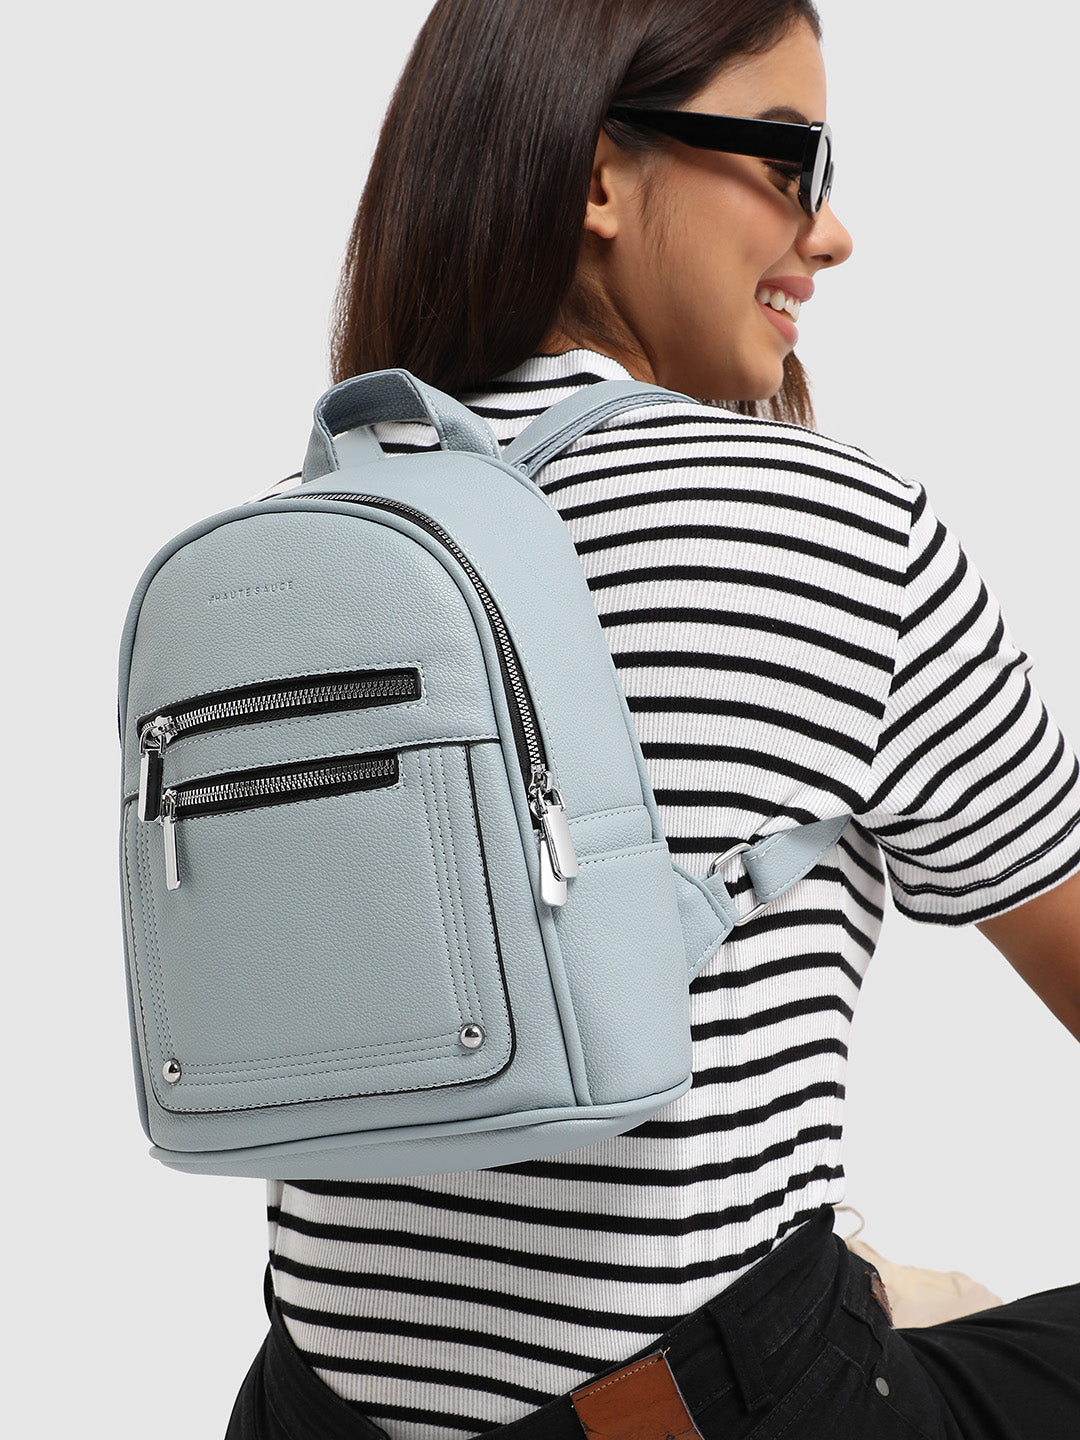 The Utility Mini Backpack - Icy Blue